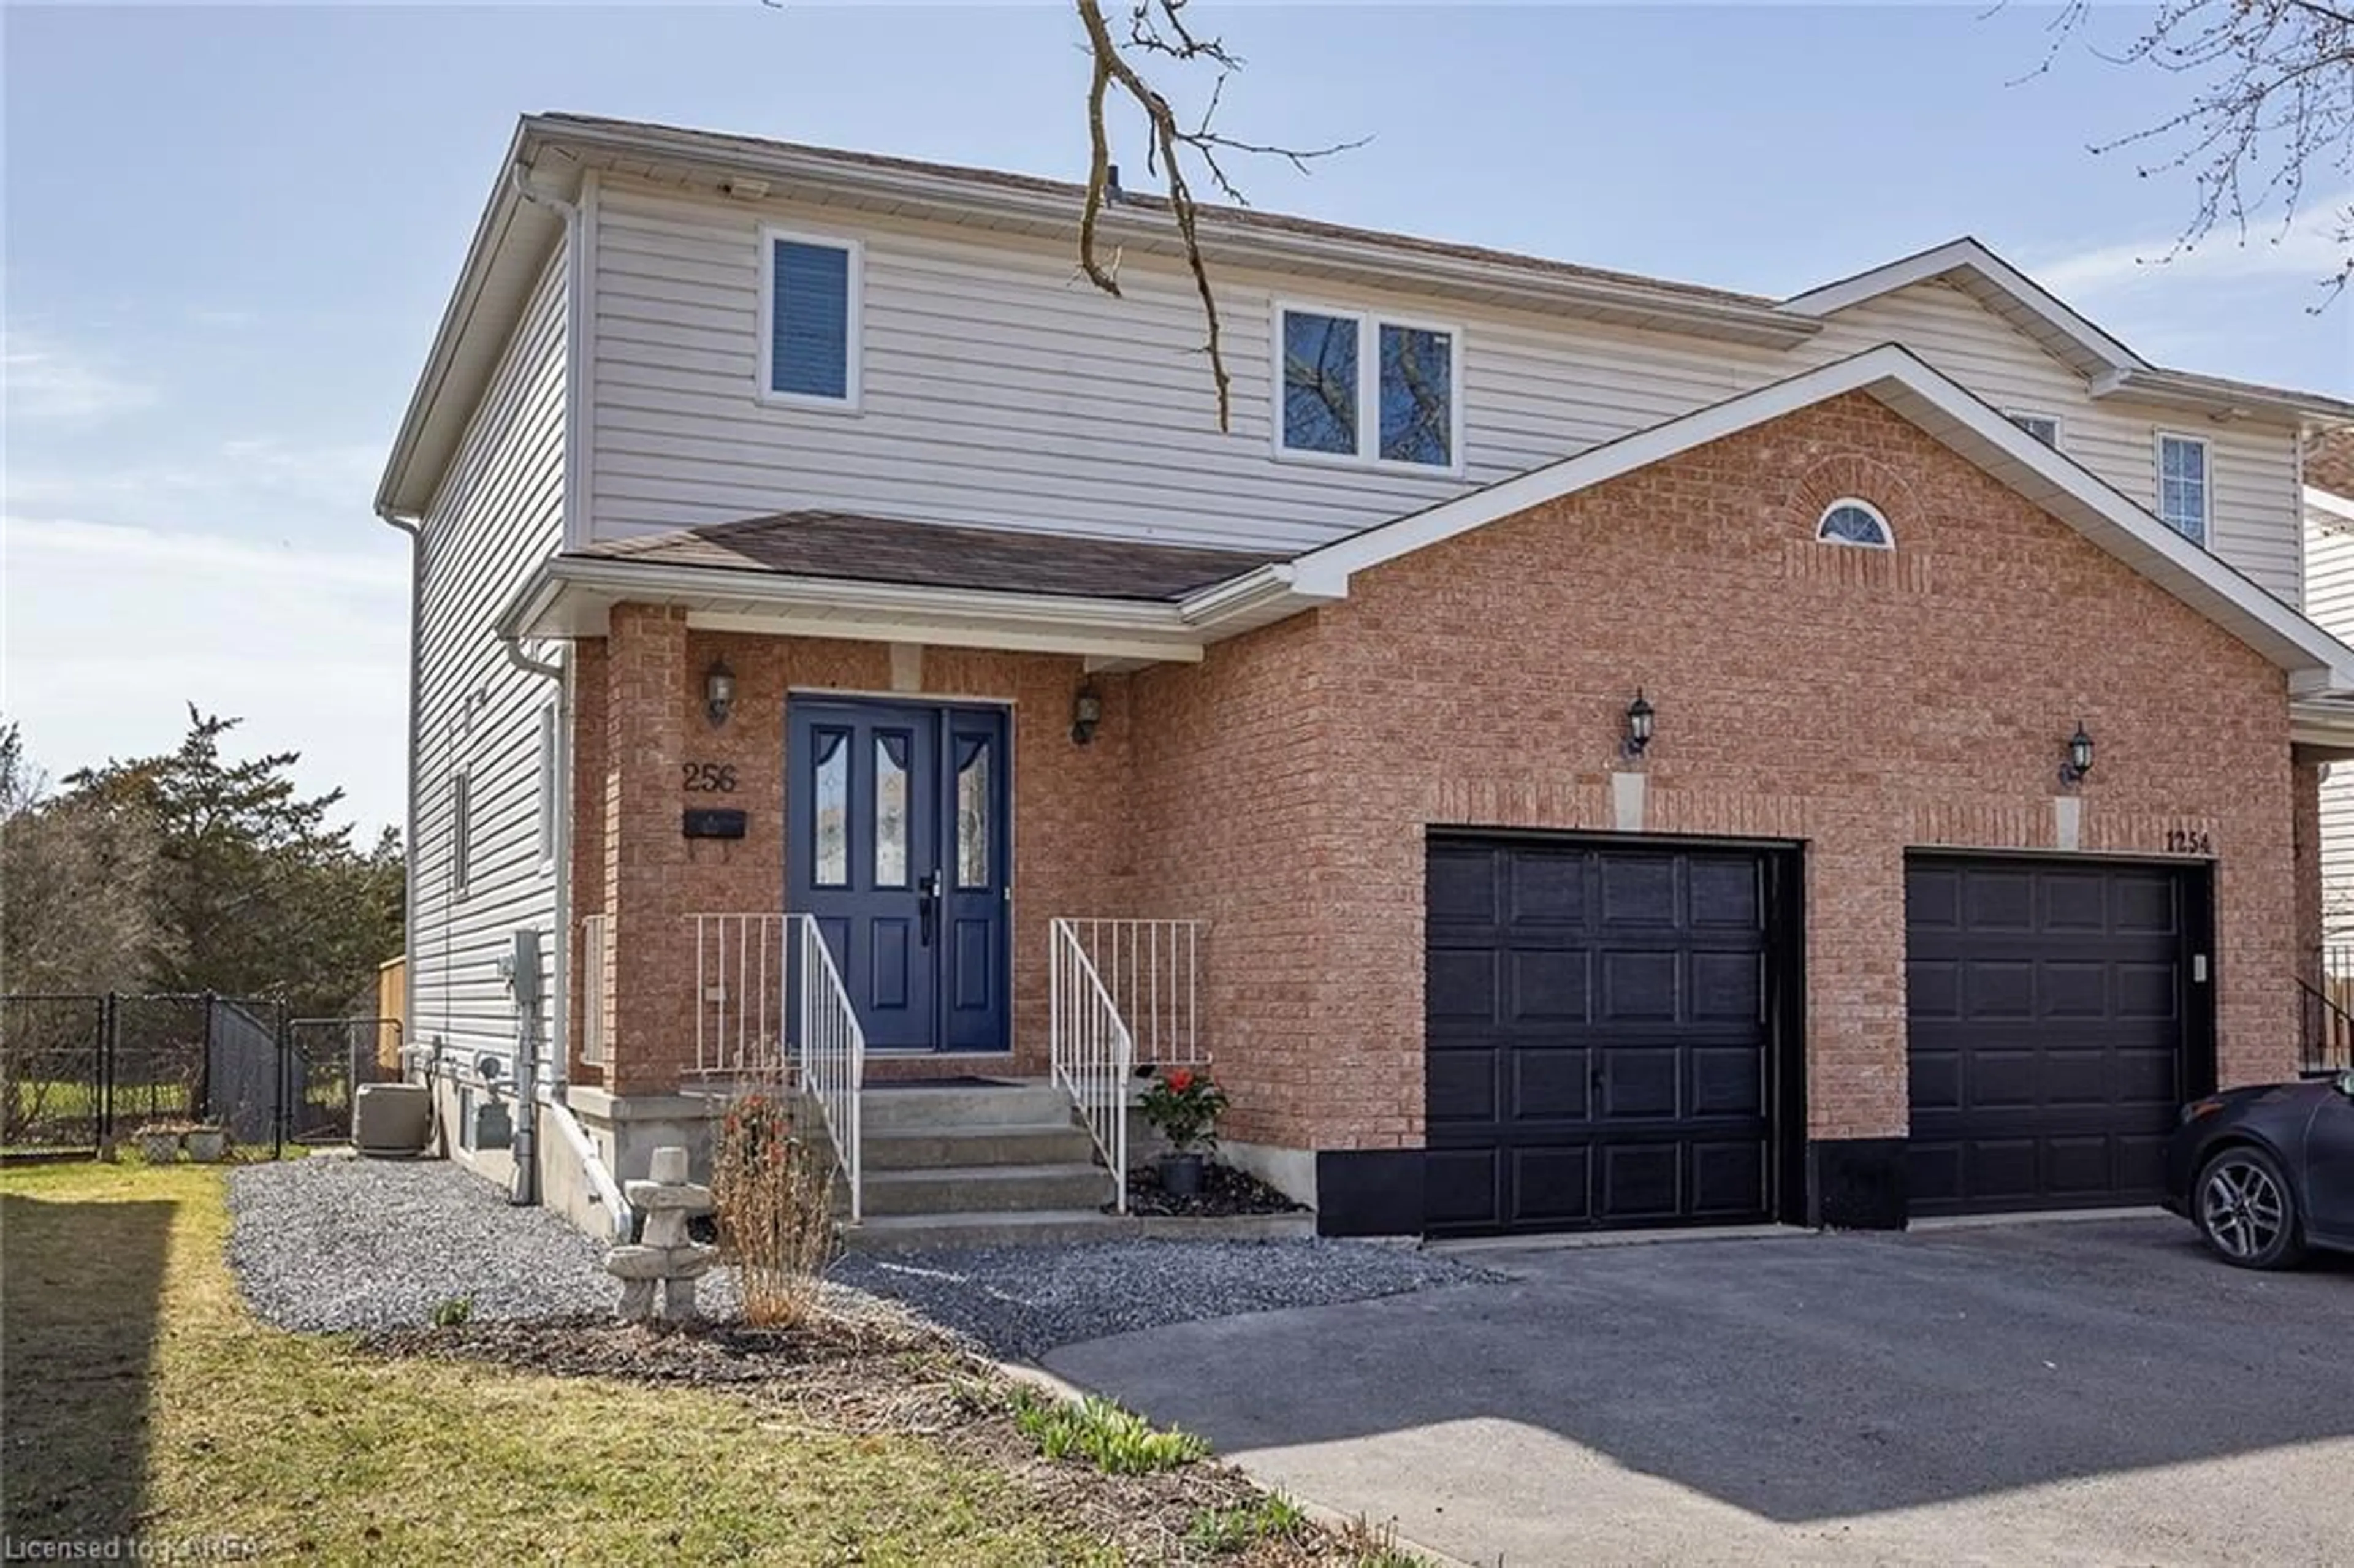 Home with brick exterior material for 1256 Brackenwood Cres, Kingston Ontario K7P 2W1